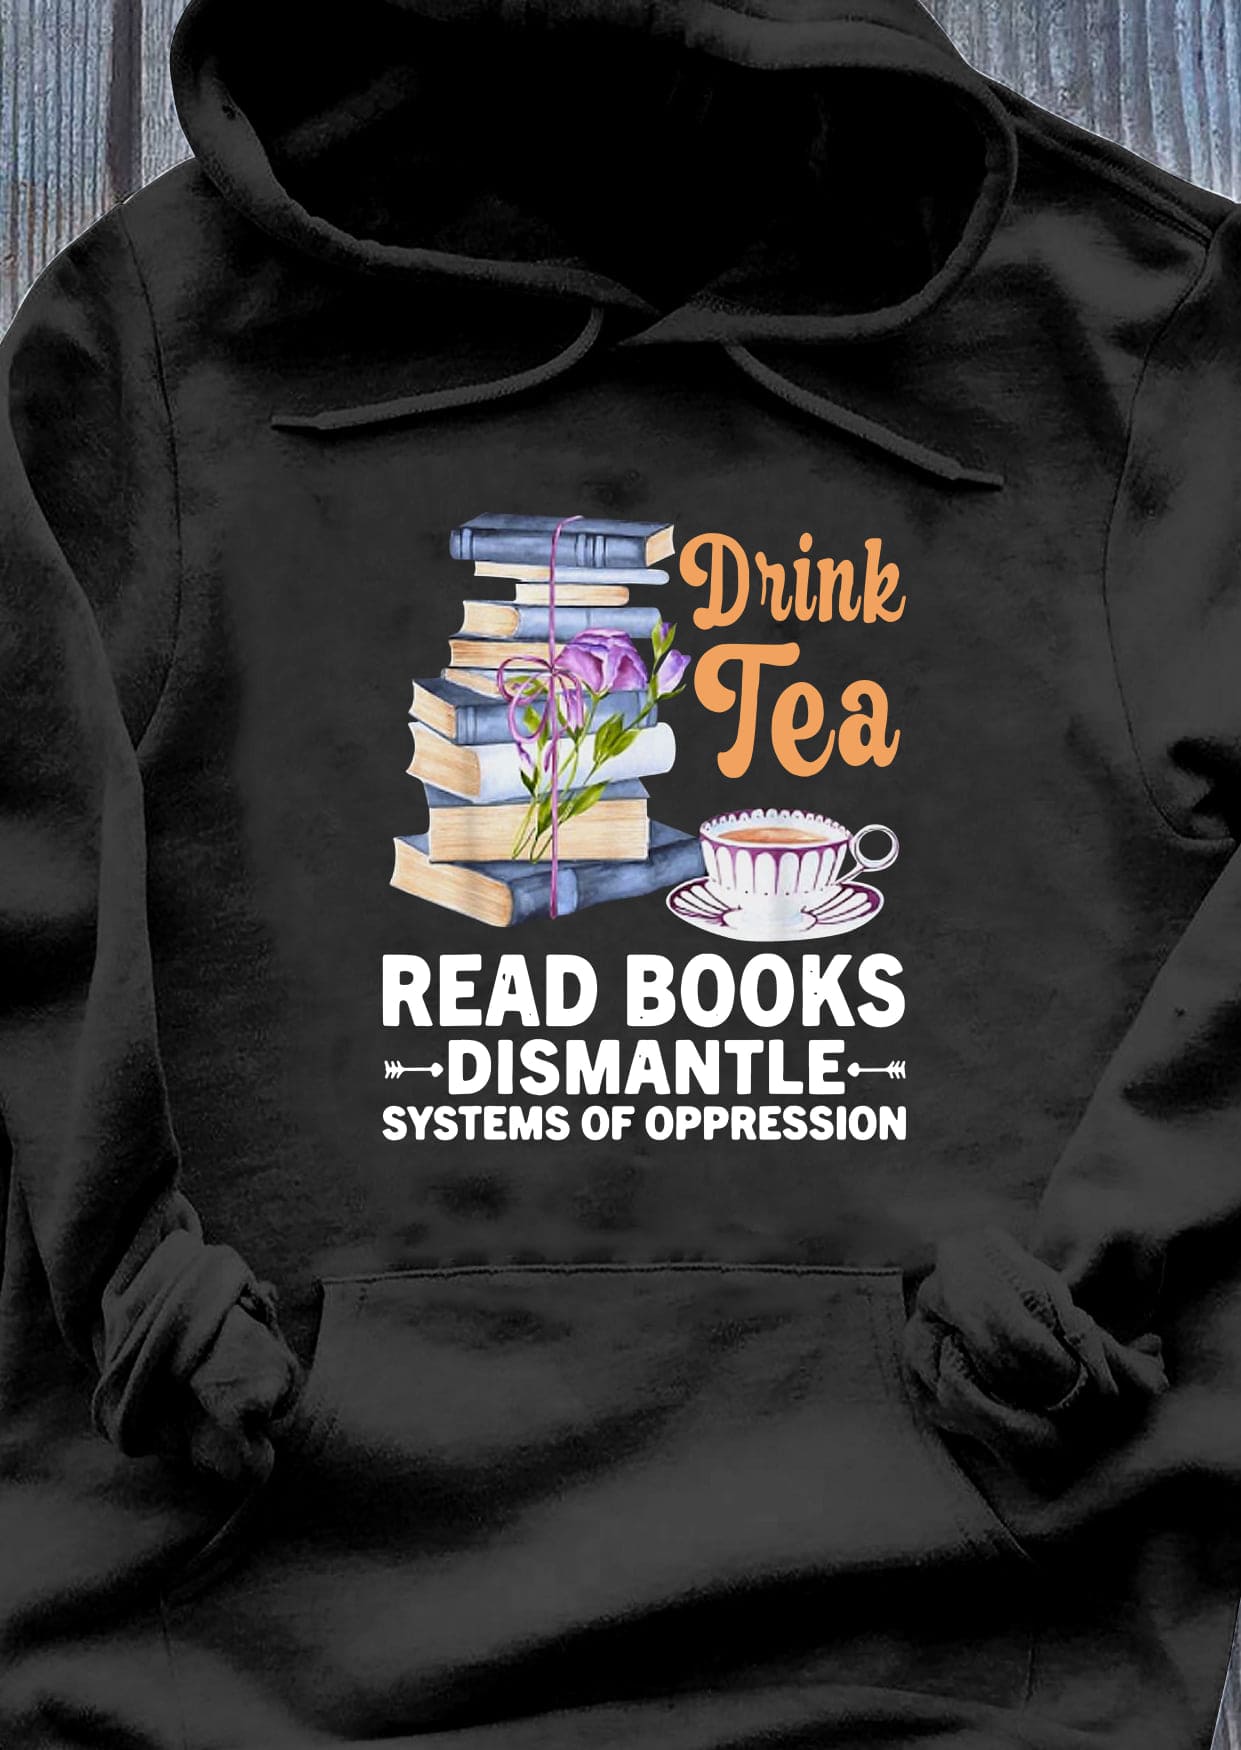 Tea Book - Drink tea read books dismantle systems of oppression